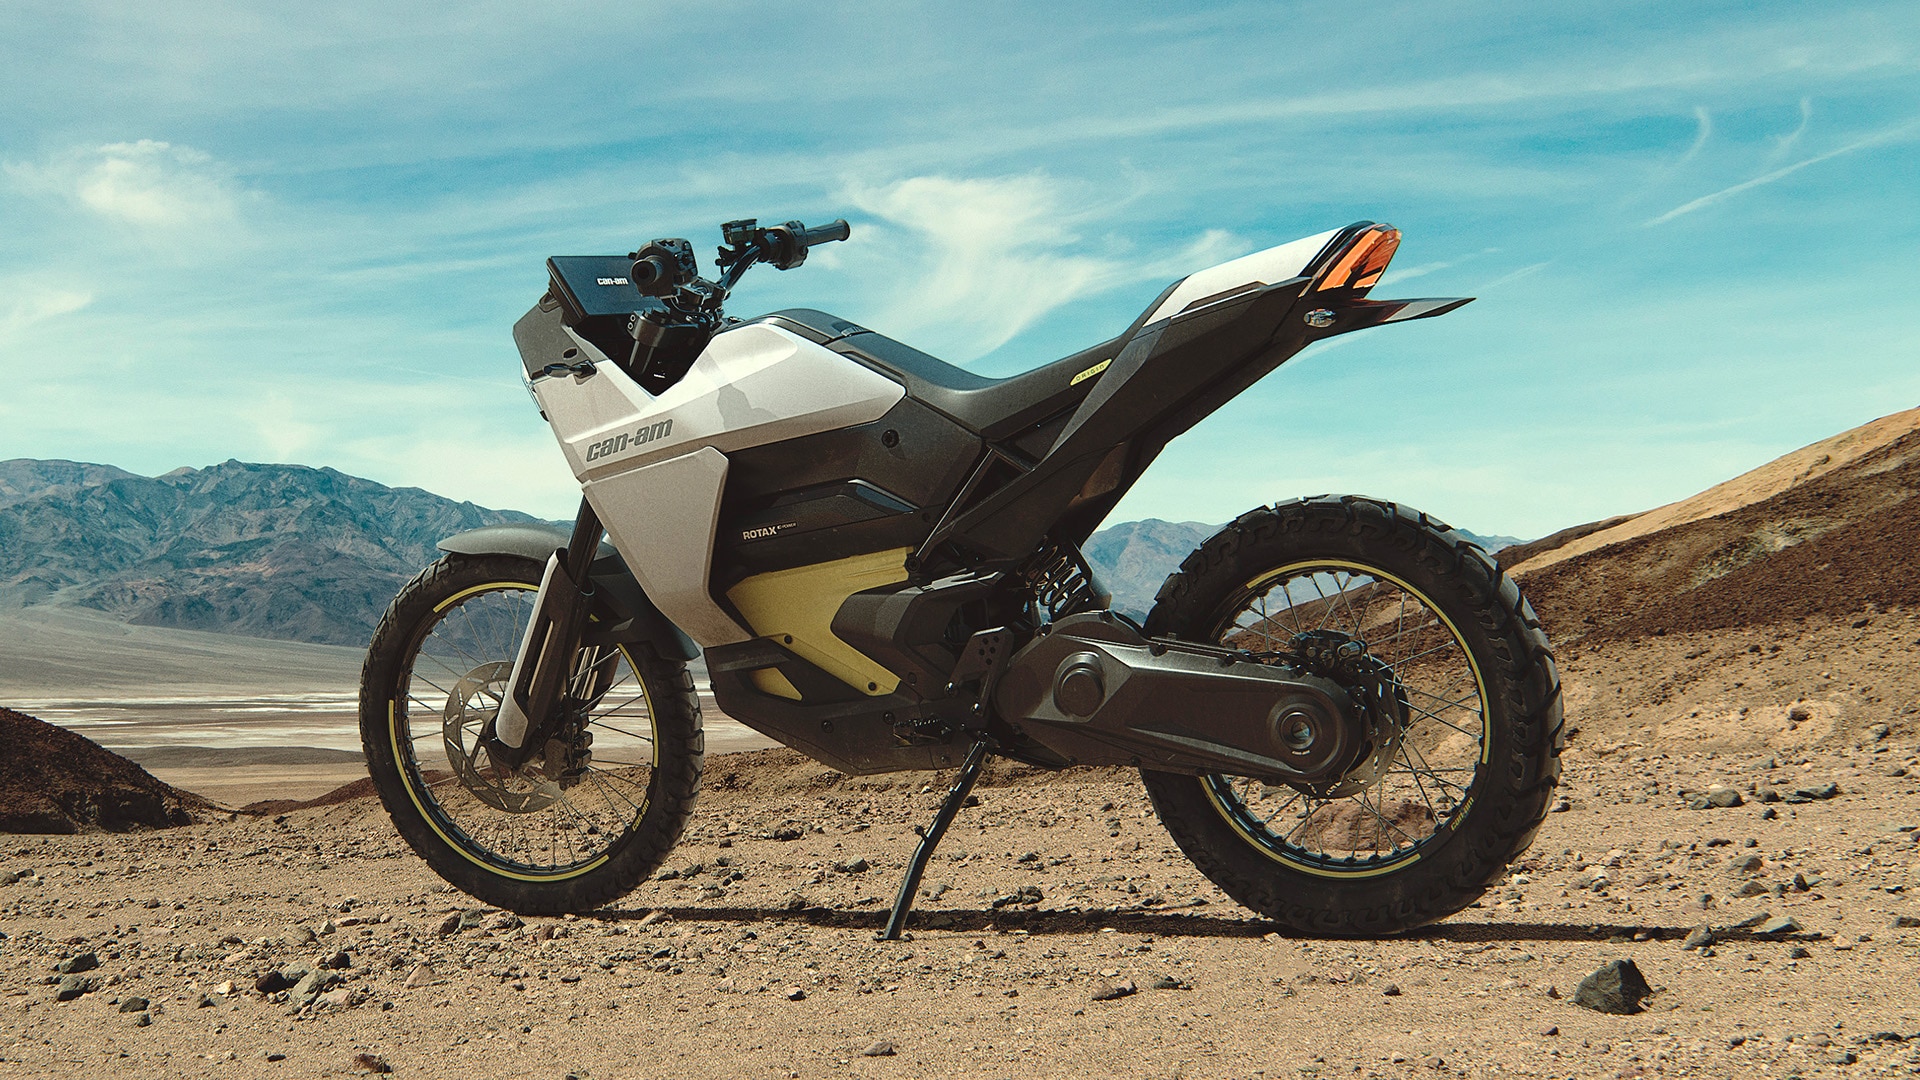 Can-Am Origin motorcycle parked in the desert